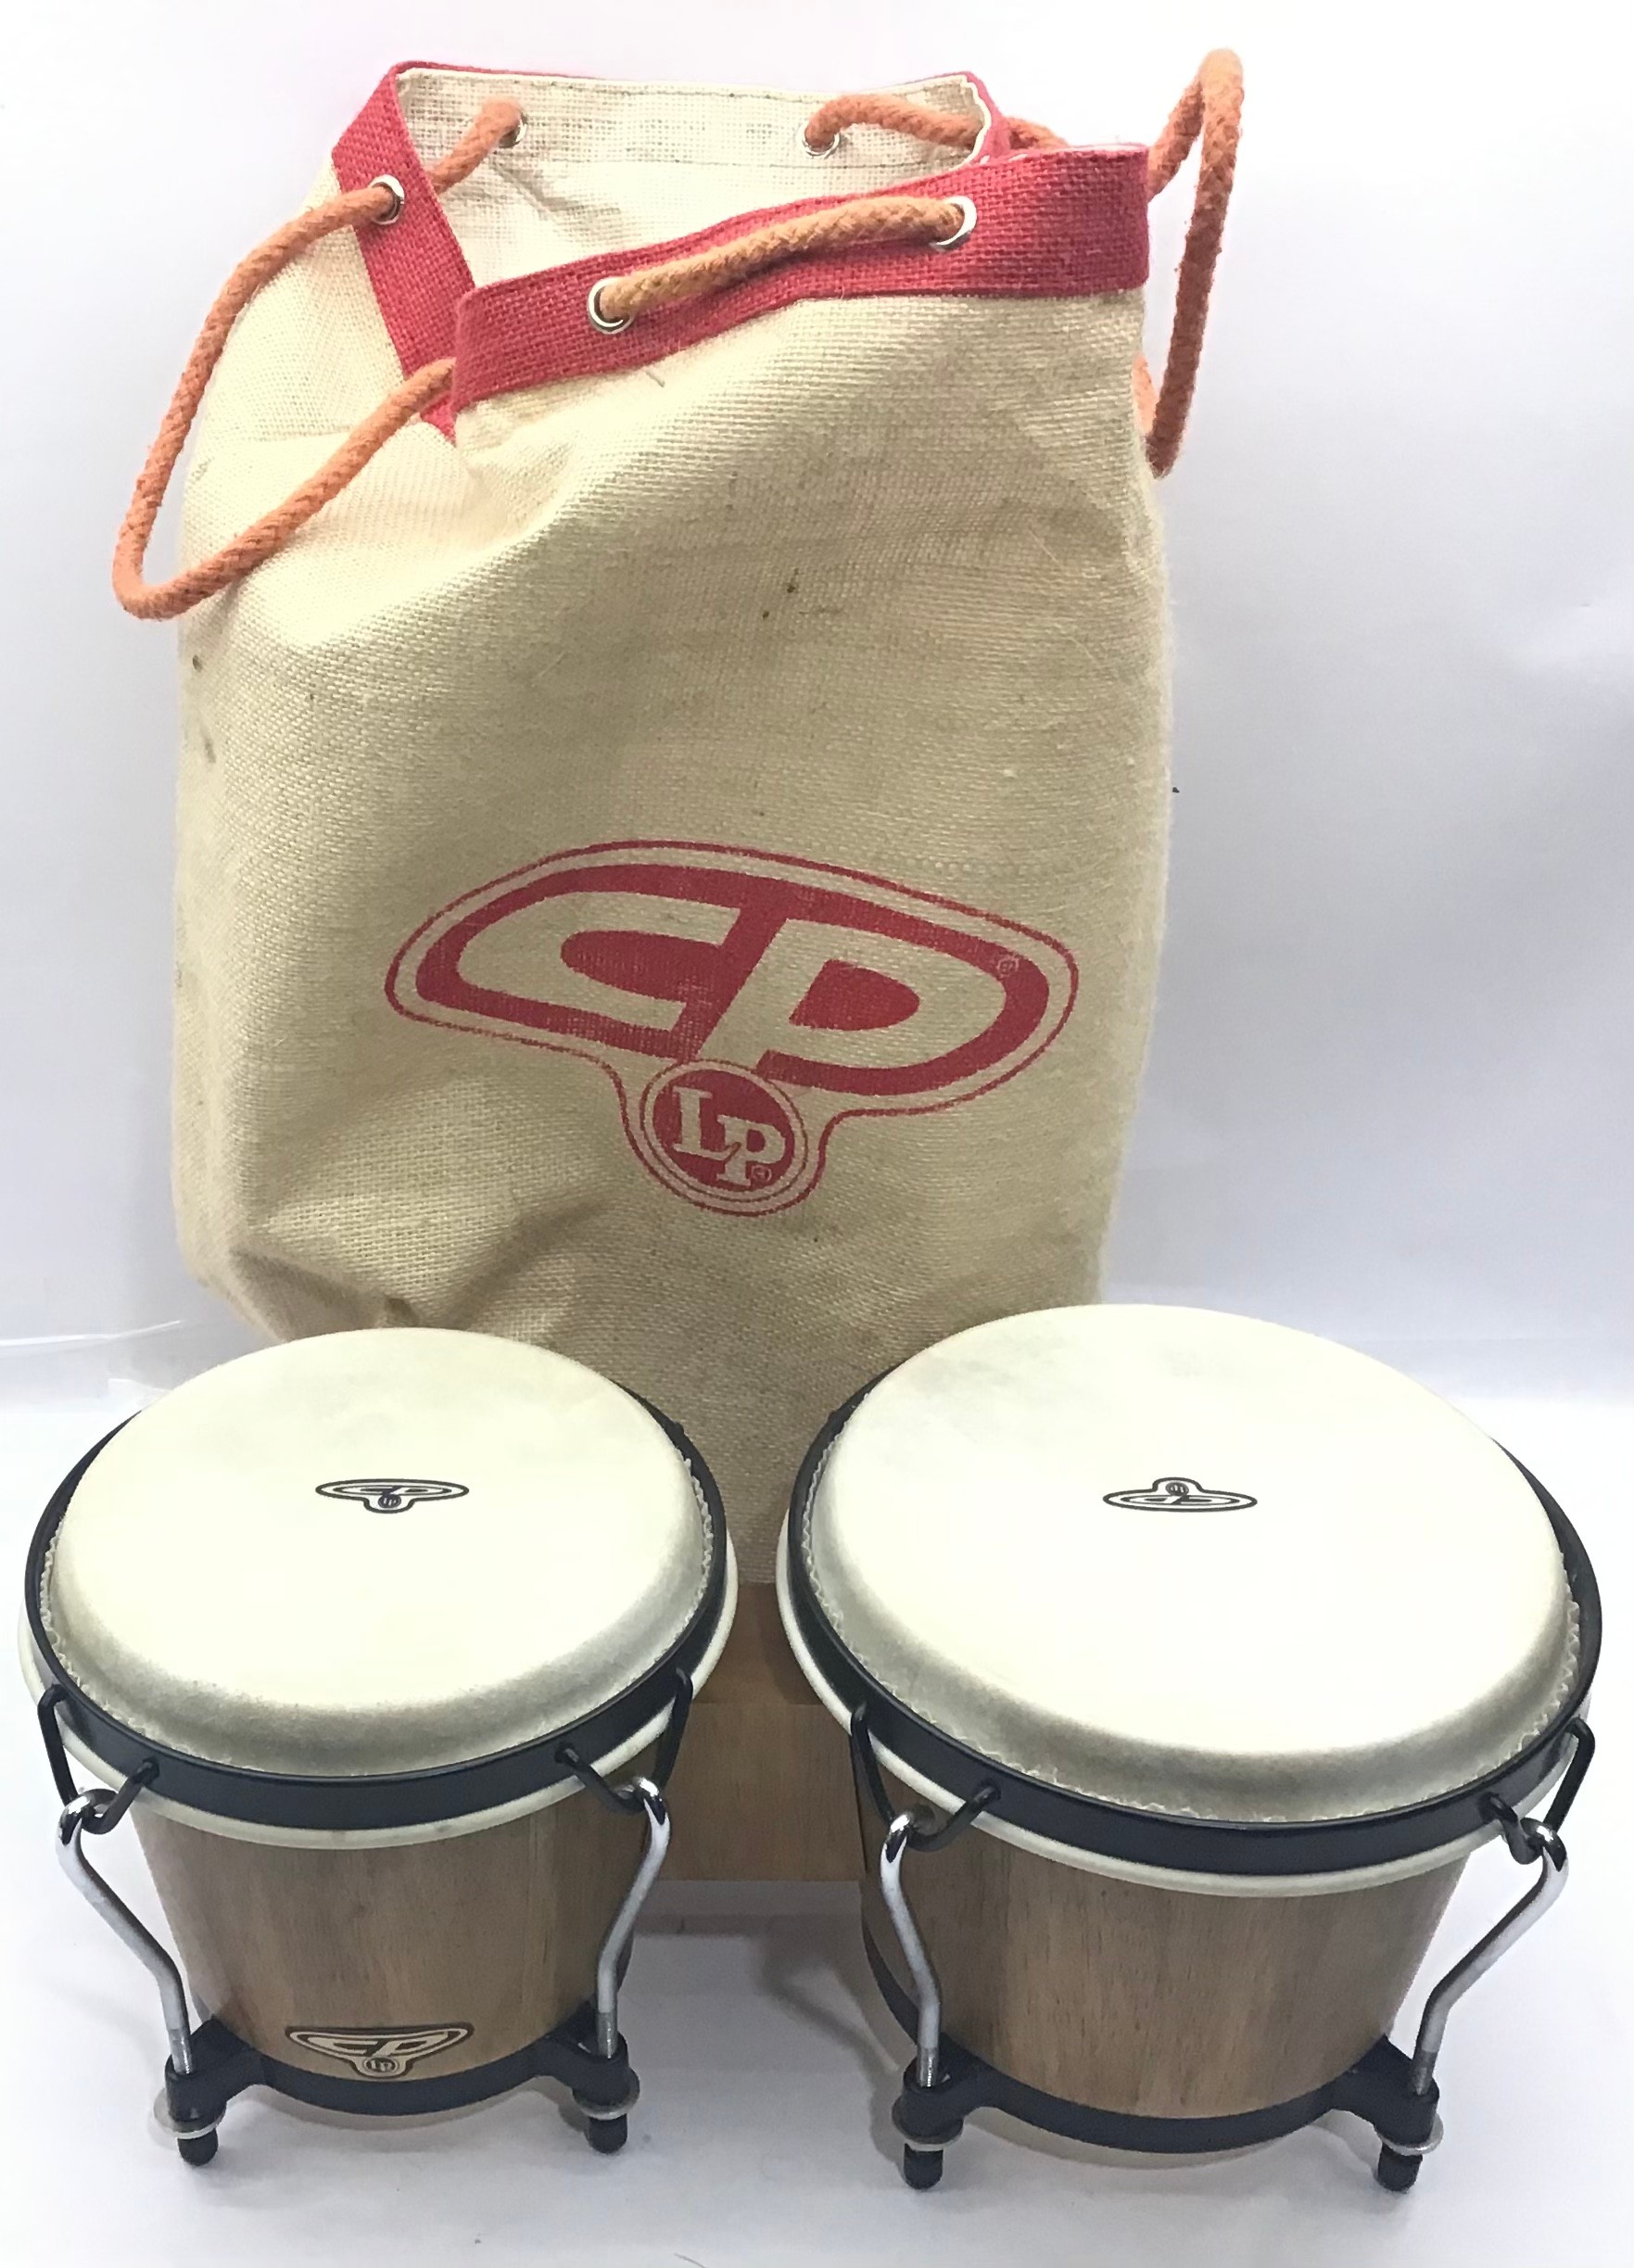 BONGO DRUMS. Here we have a small set Of CP Bongo’s complete with original carry bag with makers